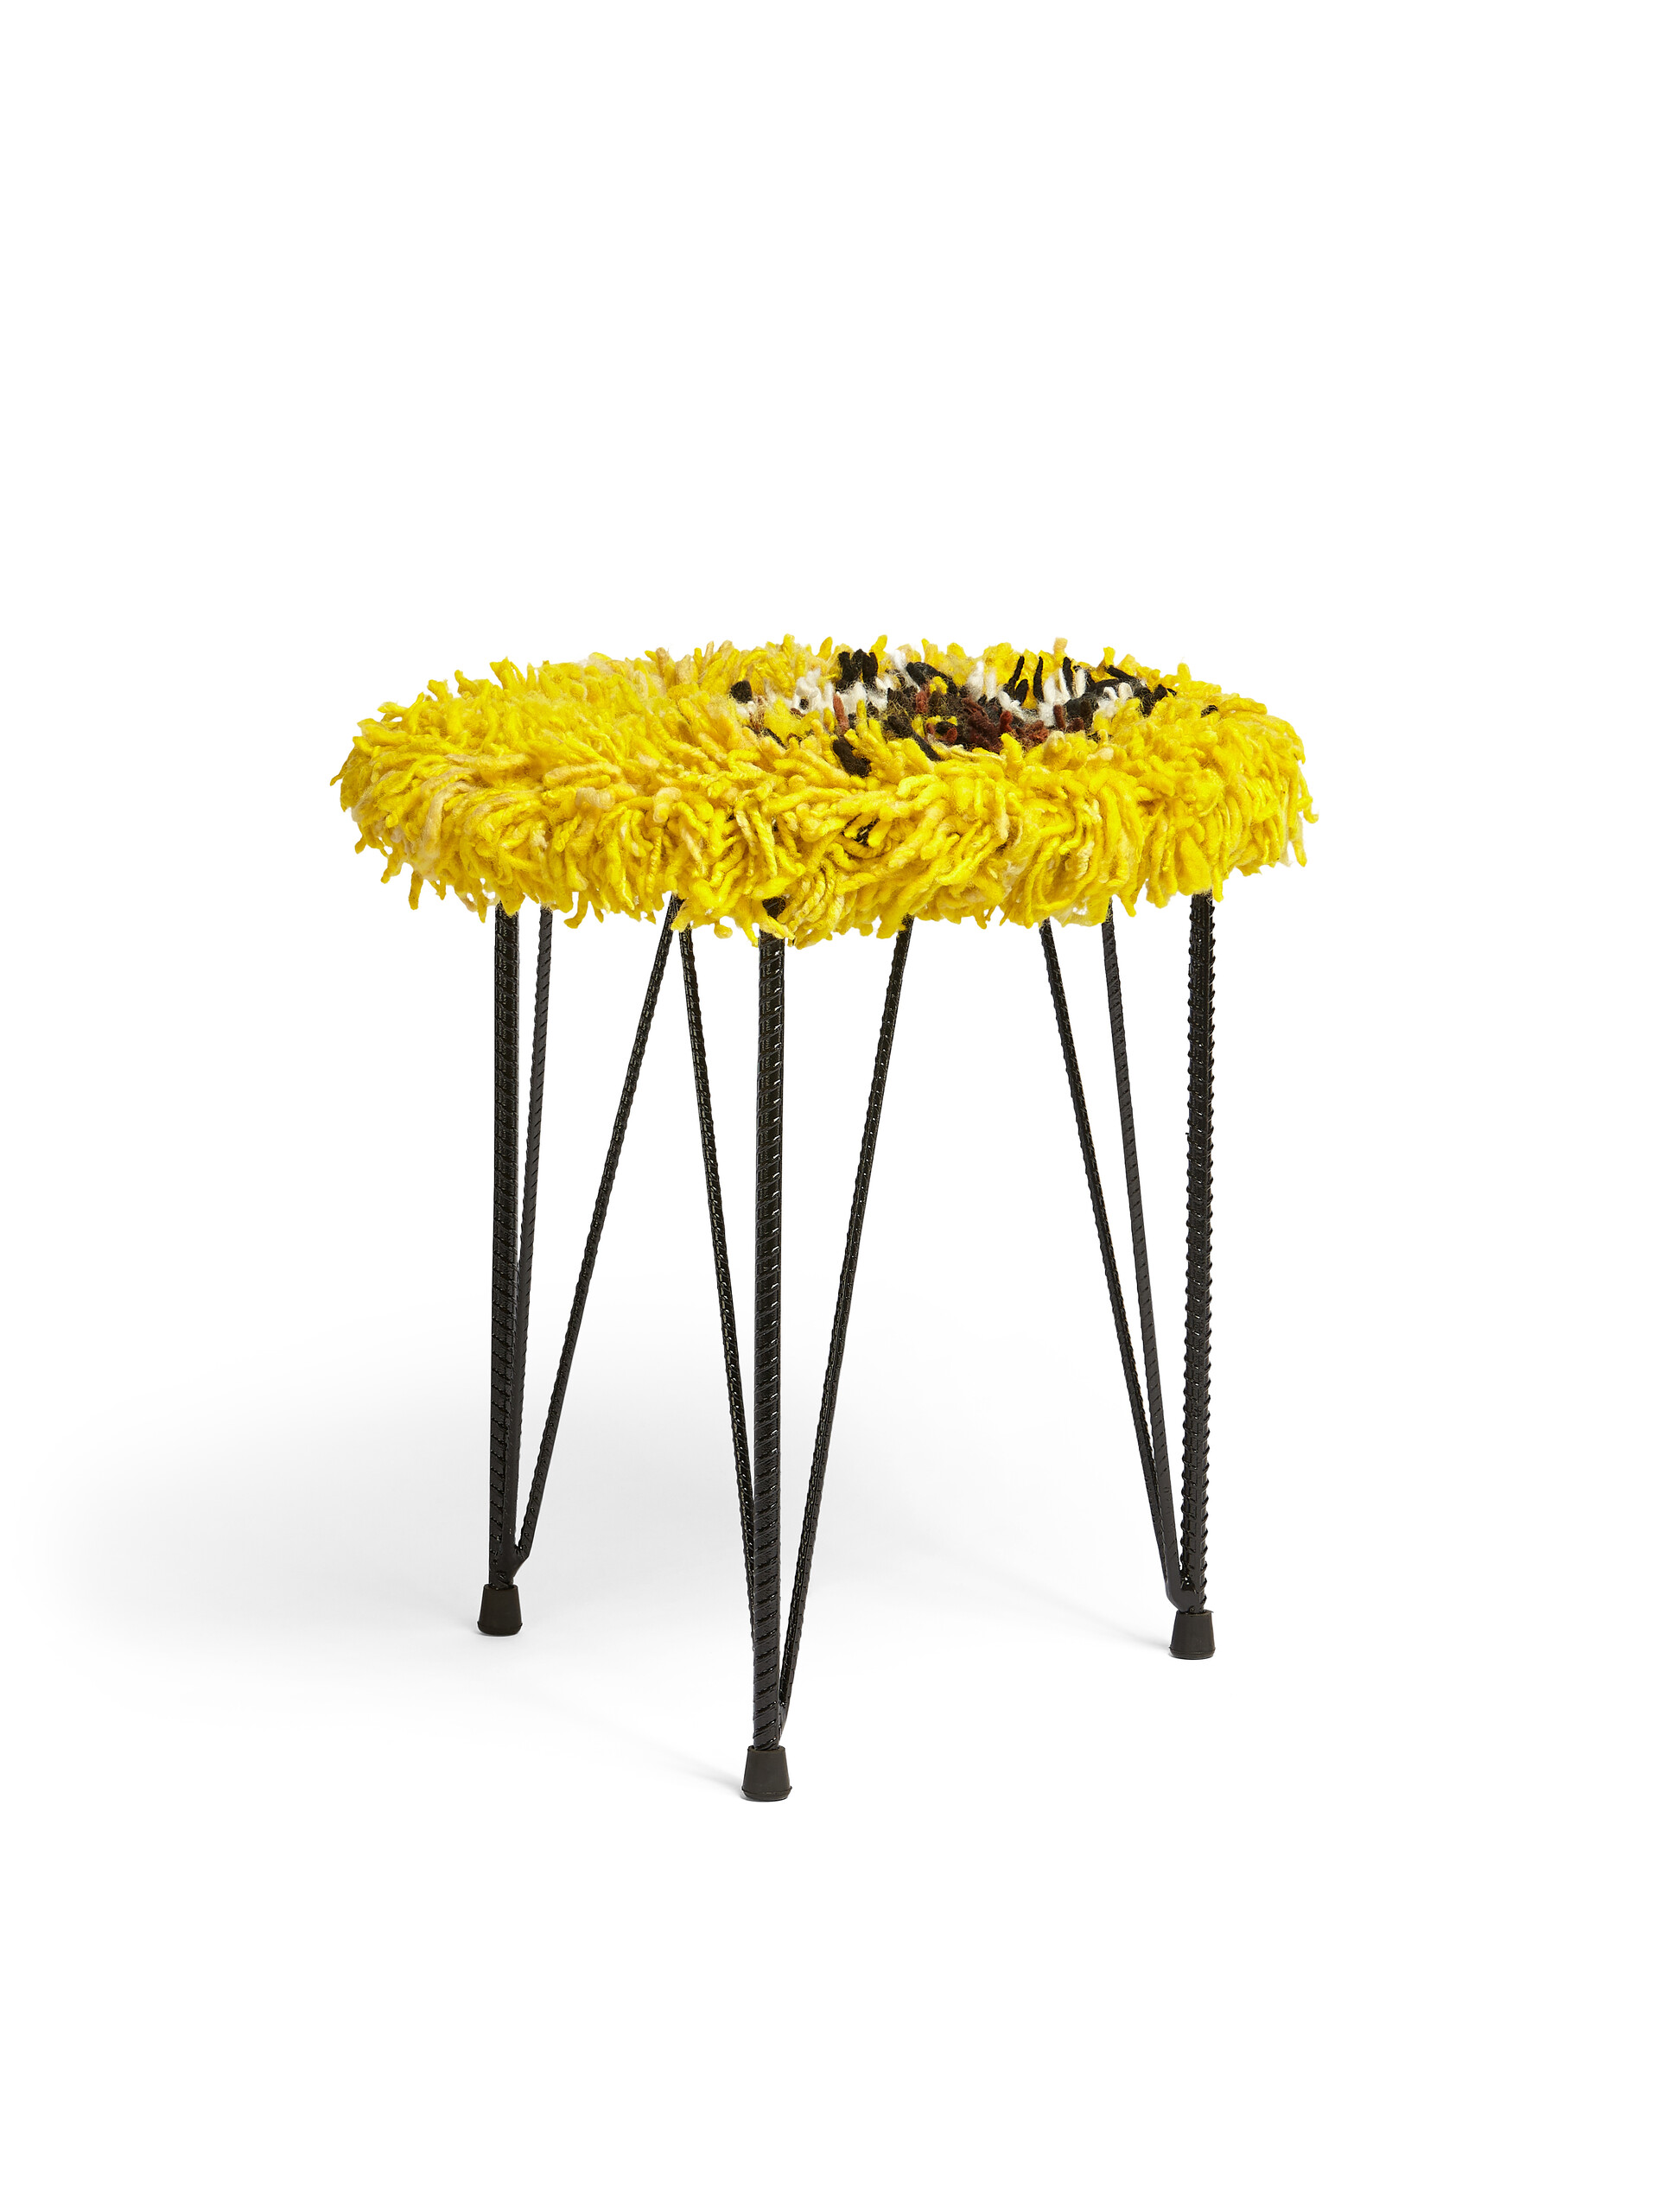 Flower MARNI MARKET stool in iron and wool - Furniture - Image 2